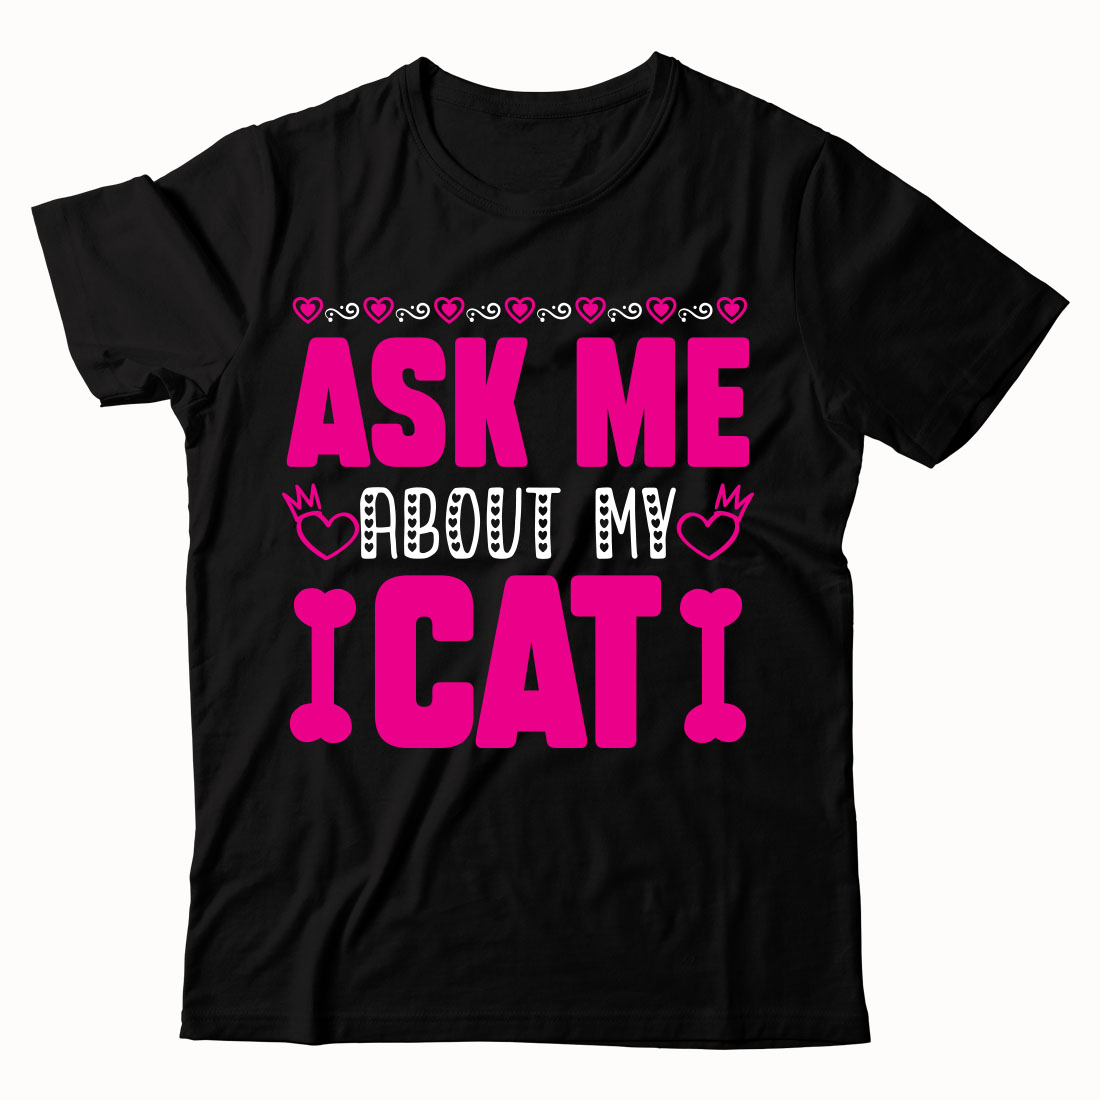 T - shirt that says ask me about my cat.